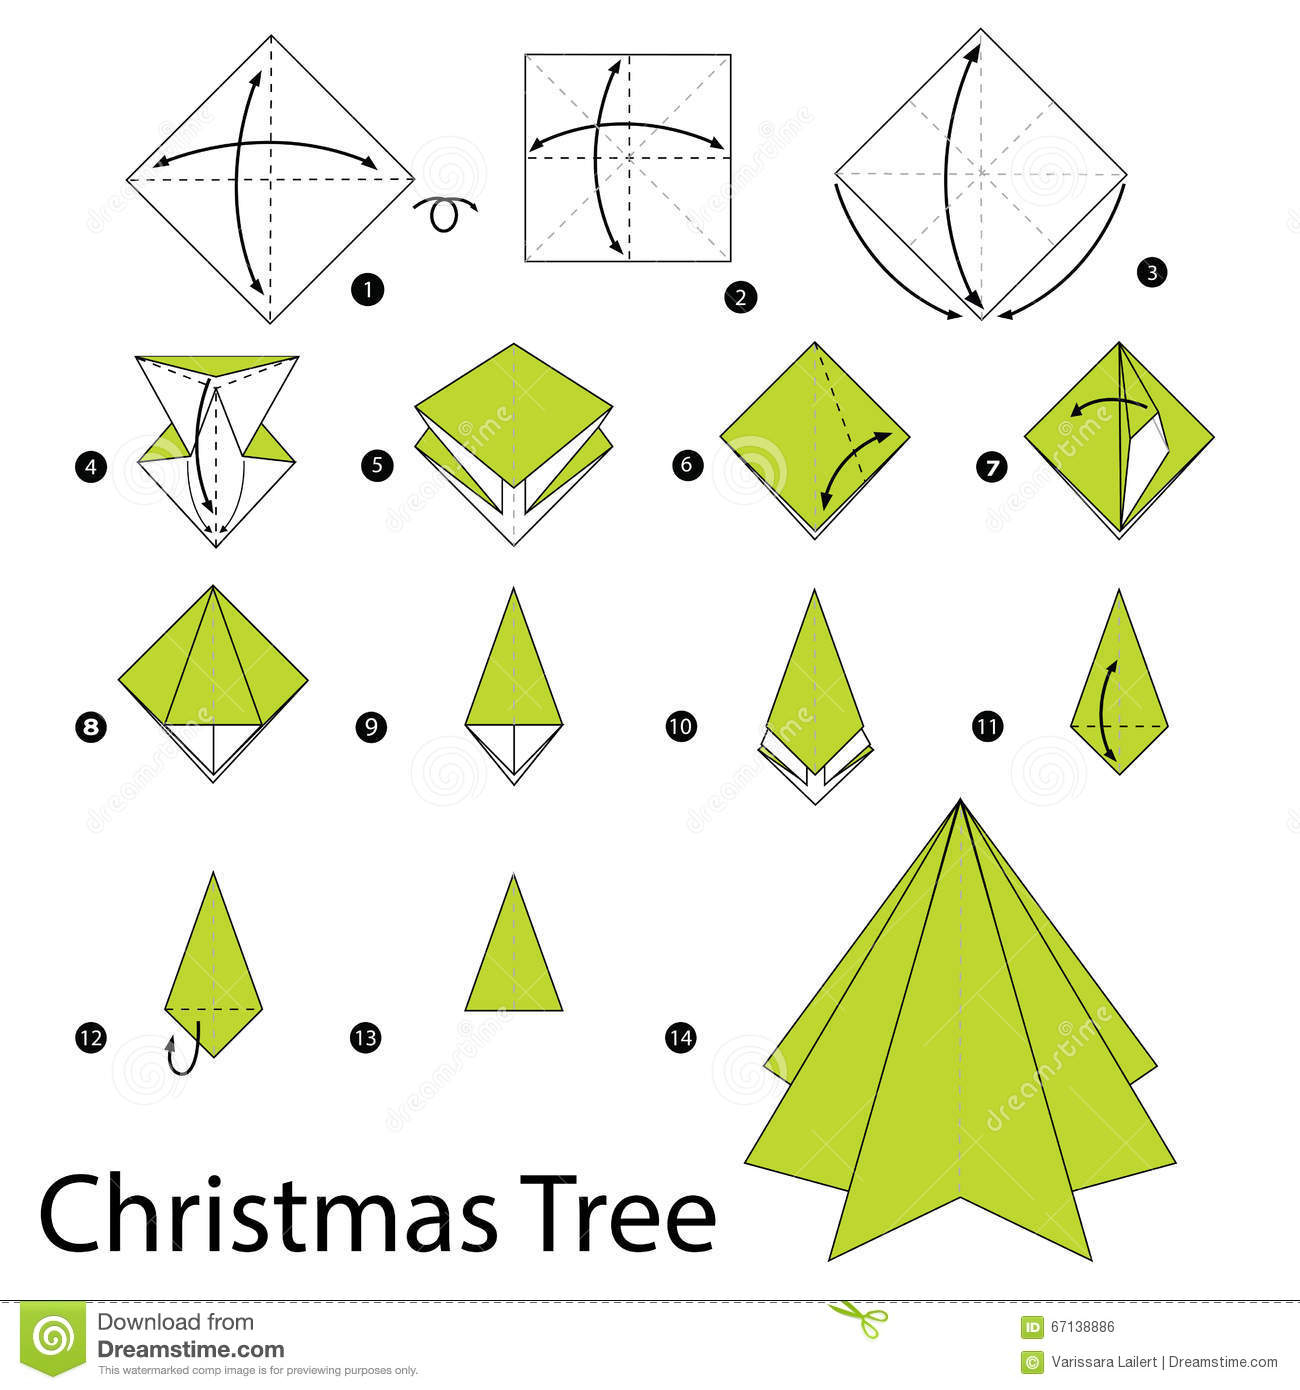 Origami Ornaments Instructions Christmas Tree Christmas Tree Origami How To Make A Christmas Tree